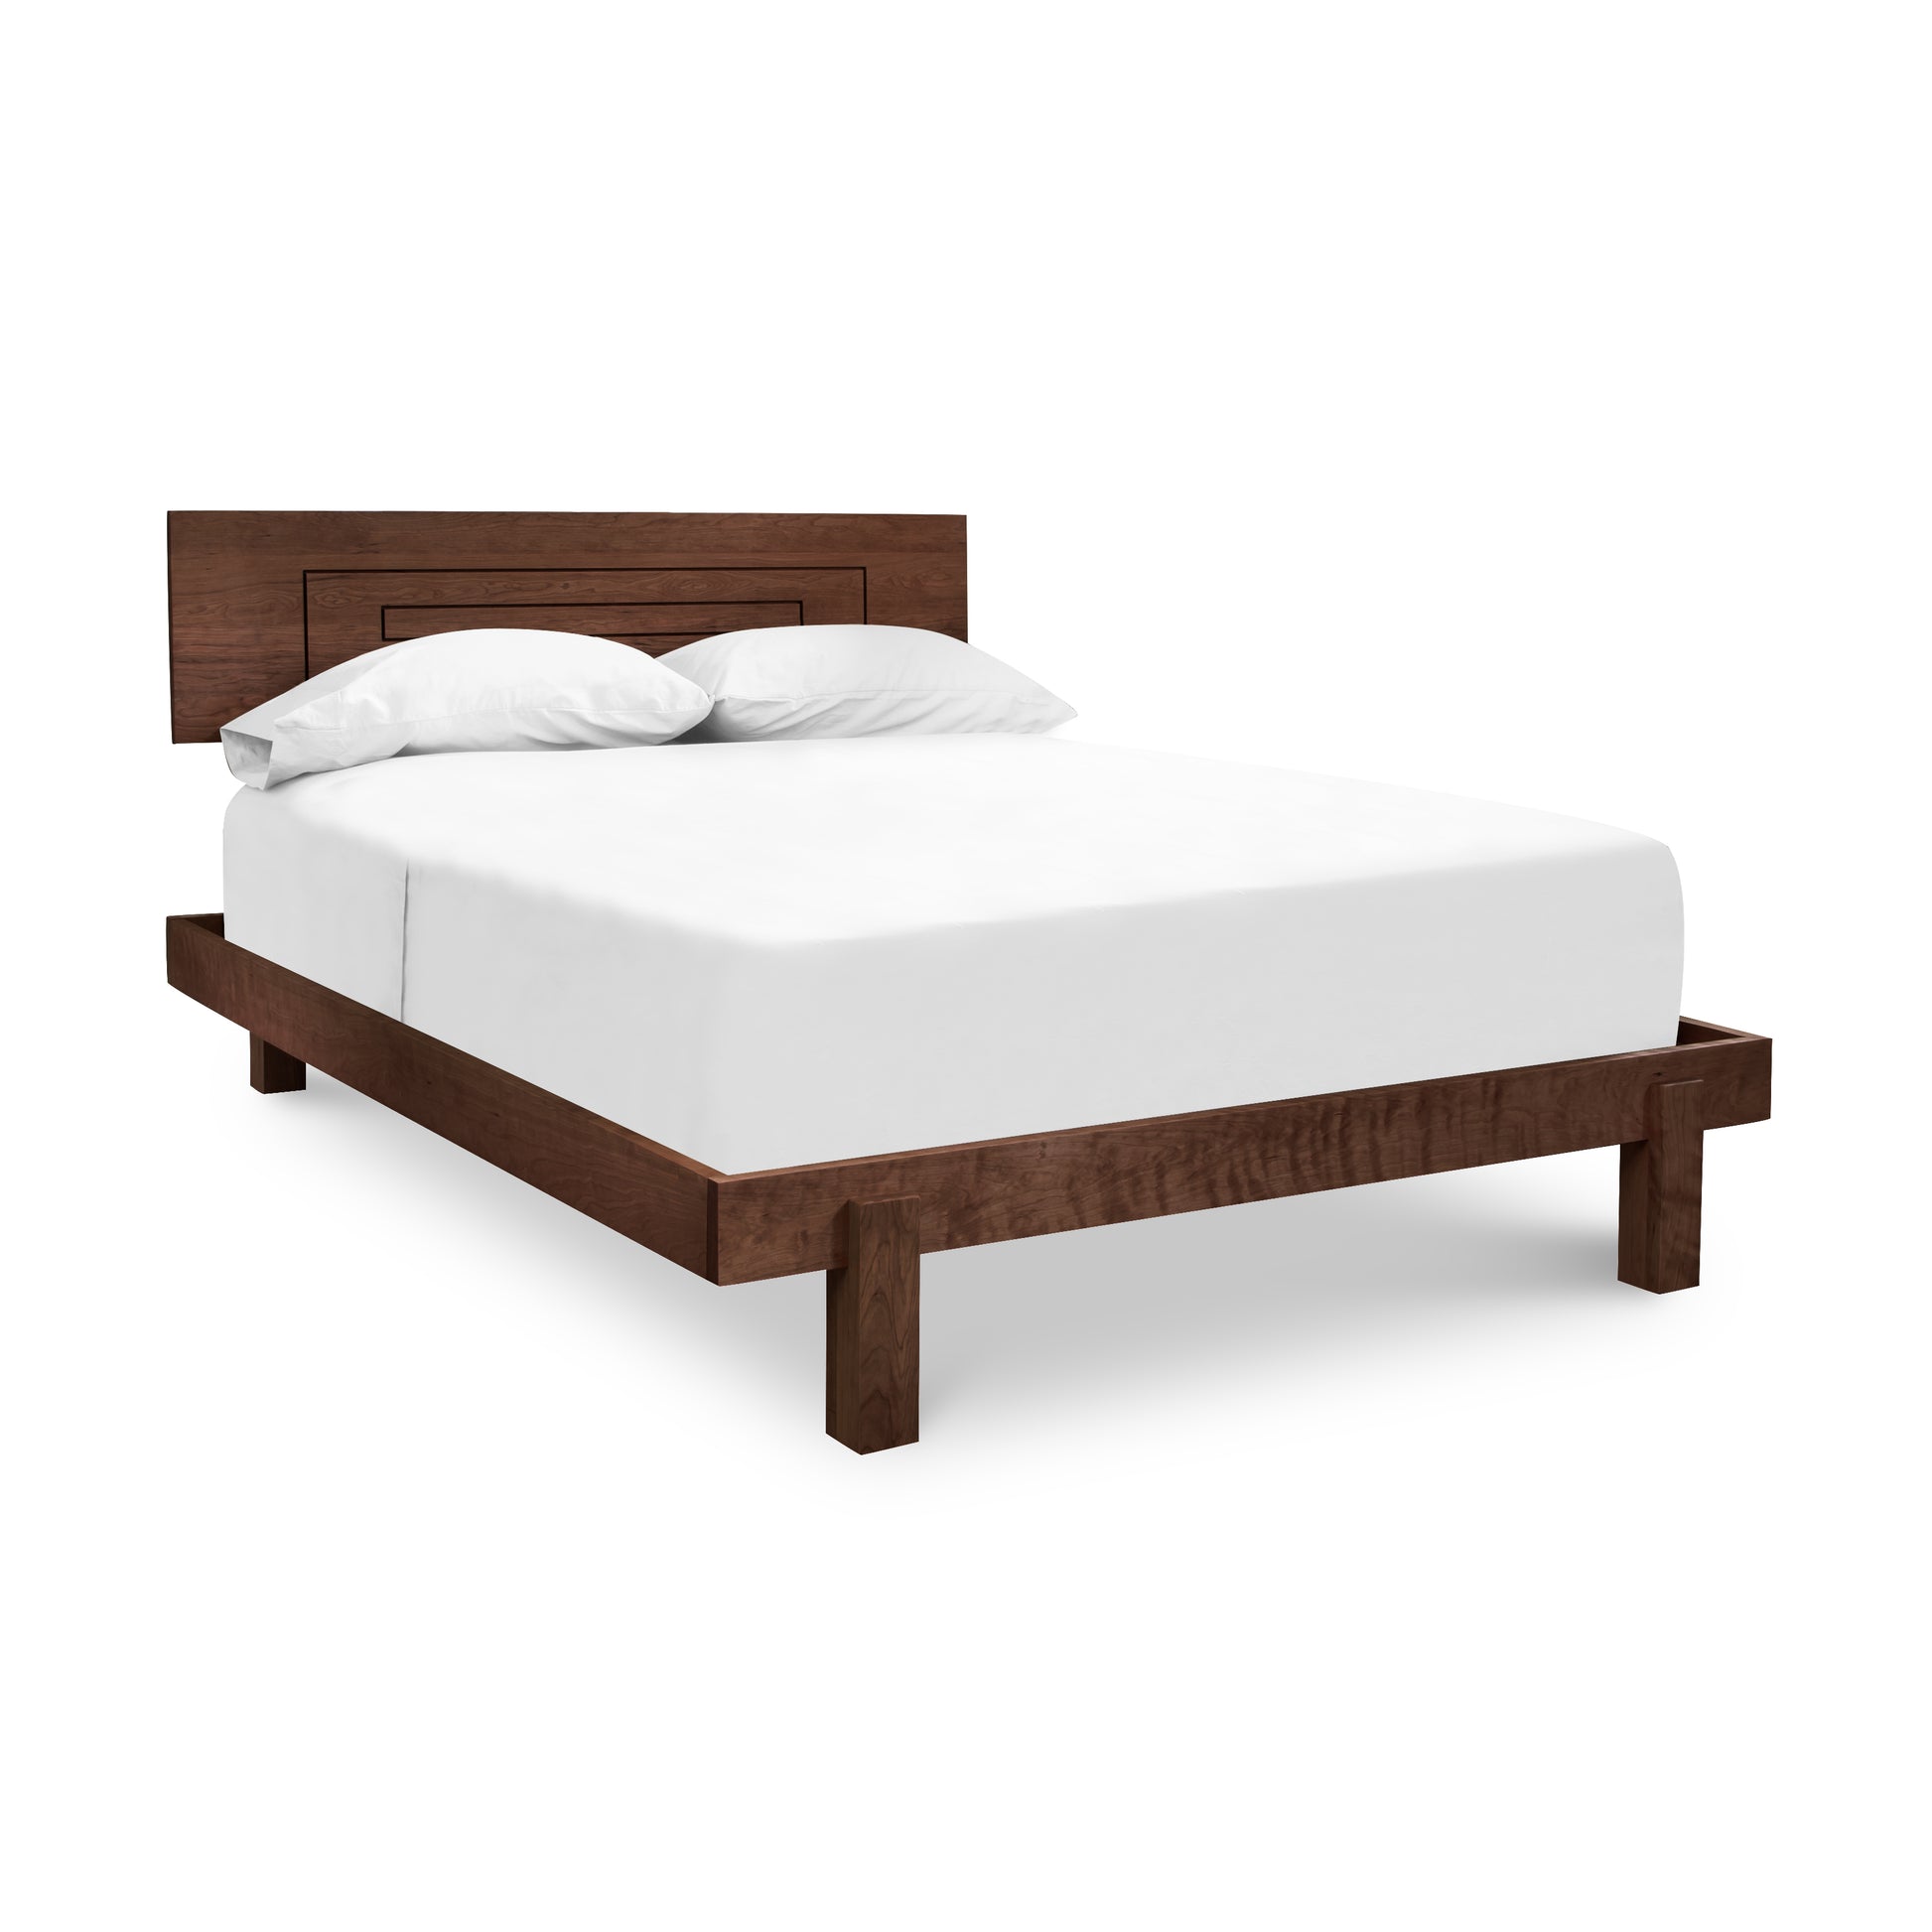 A modern Vermont Furniture Designs Loft Bed made of solid cherry wood with an eco-friendly finish, complete with a white mattress and pillows on an isolated white background.